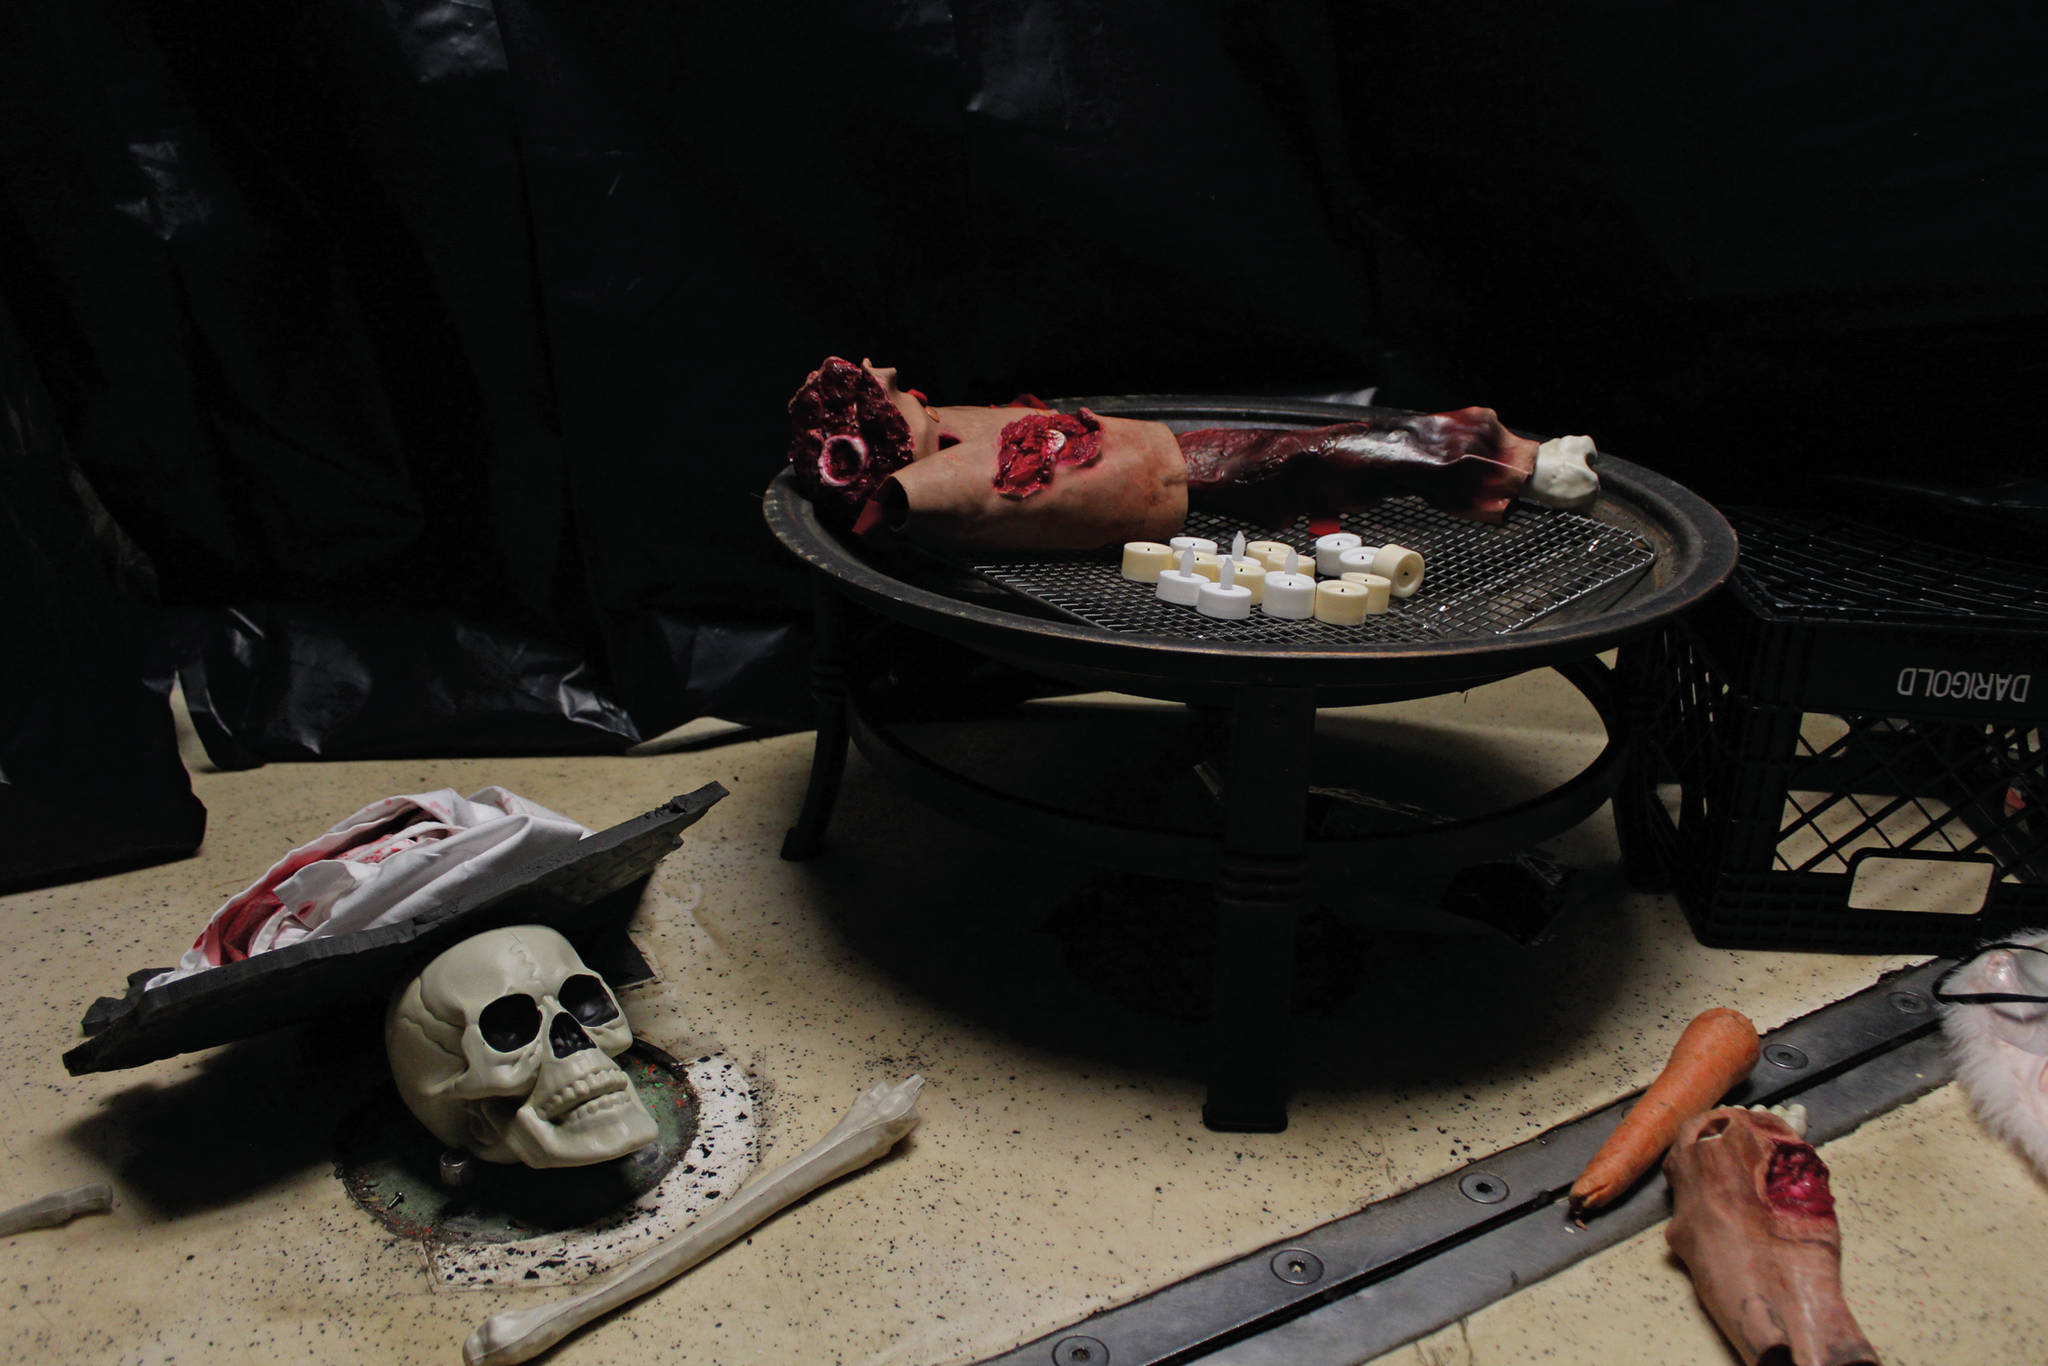 Props sit ready to be used to scare guests at this year’s Haunted Hickory, a haunted house set up on the US Coast Guard Cutter Hickory vessel, on Friday, Oct. 25, 2019 at the harbor in Homer, Alaska. (Photo by Megan Pacer/Homer News)